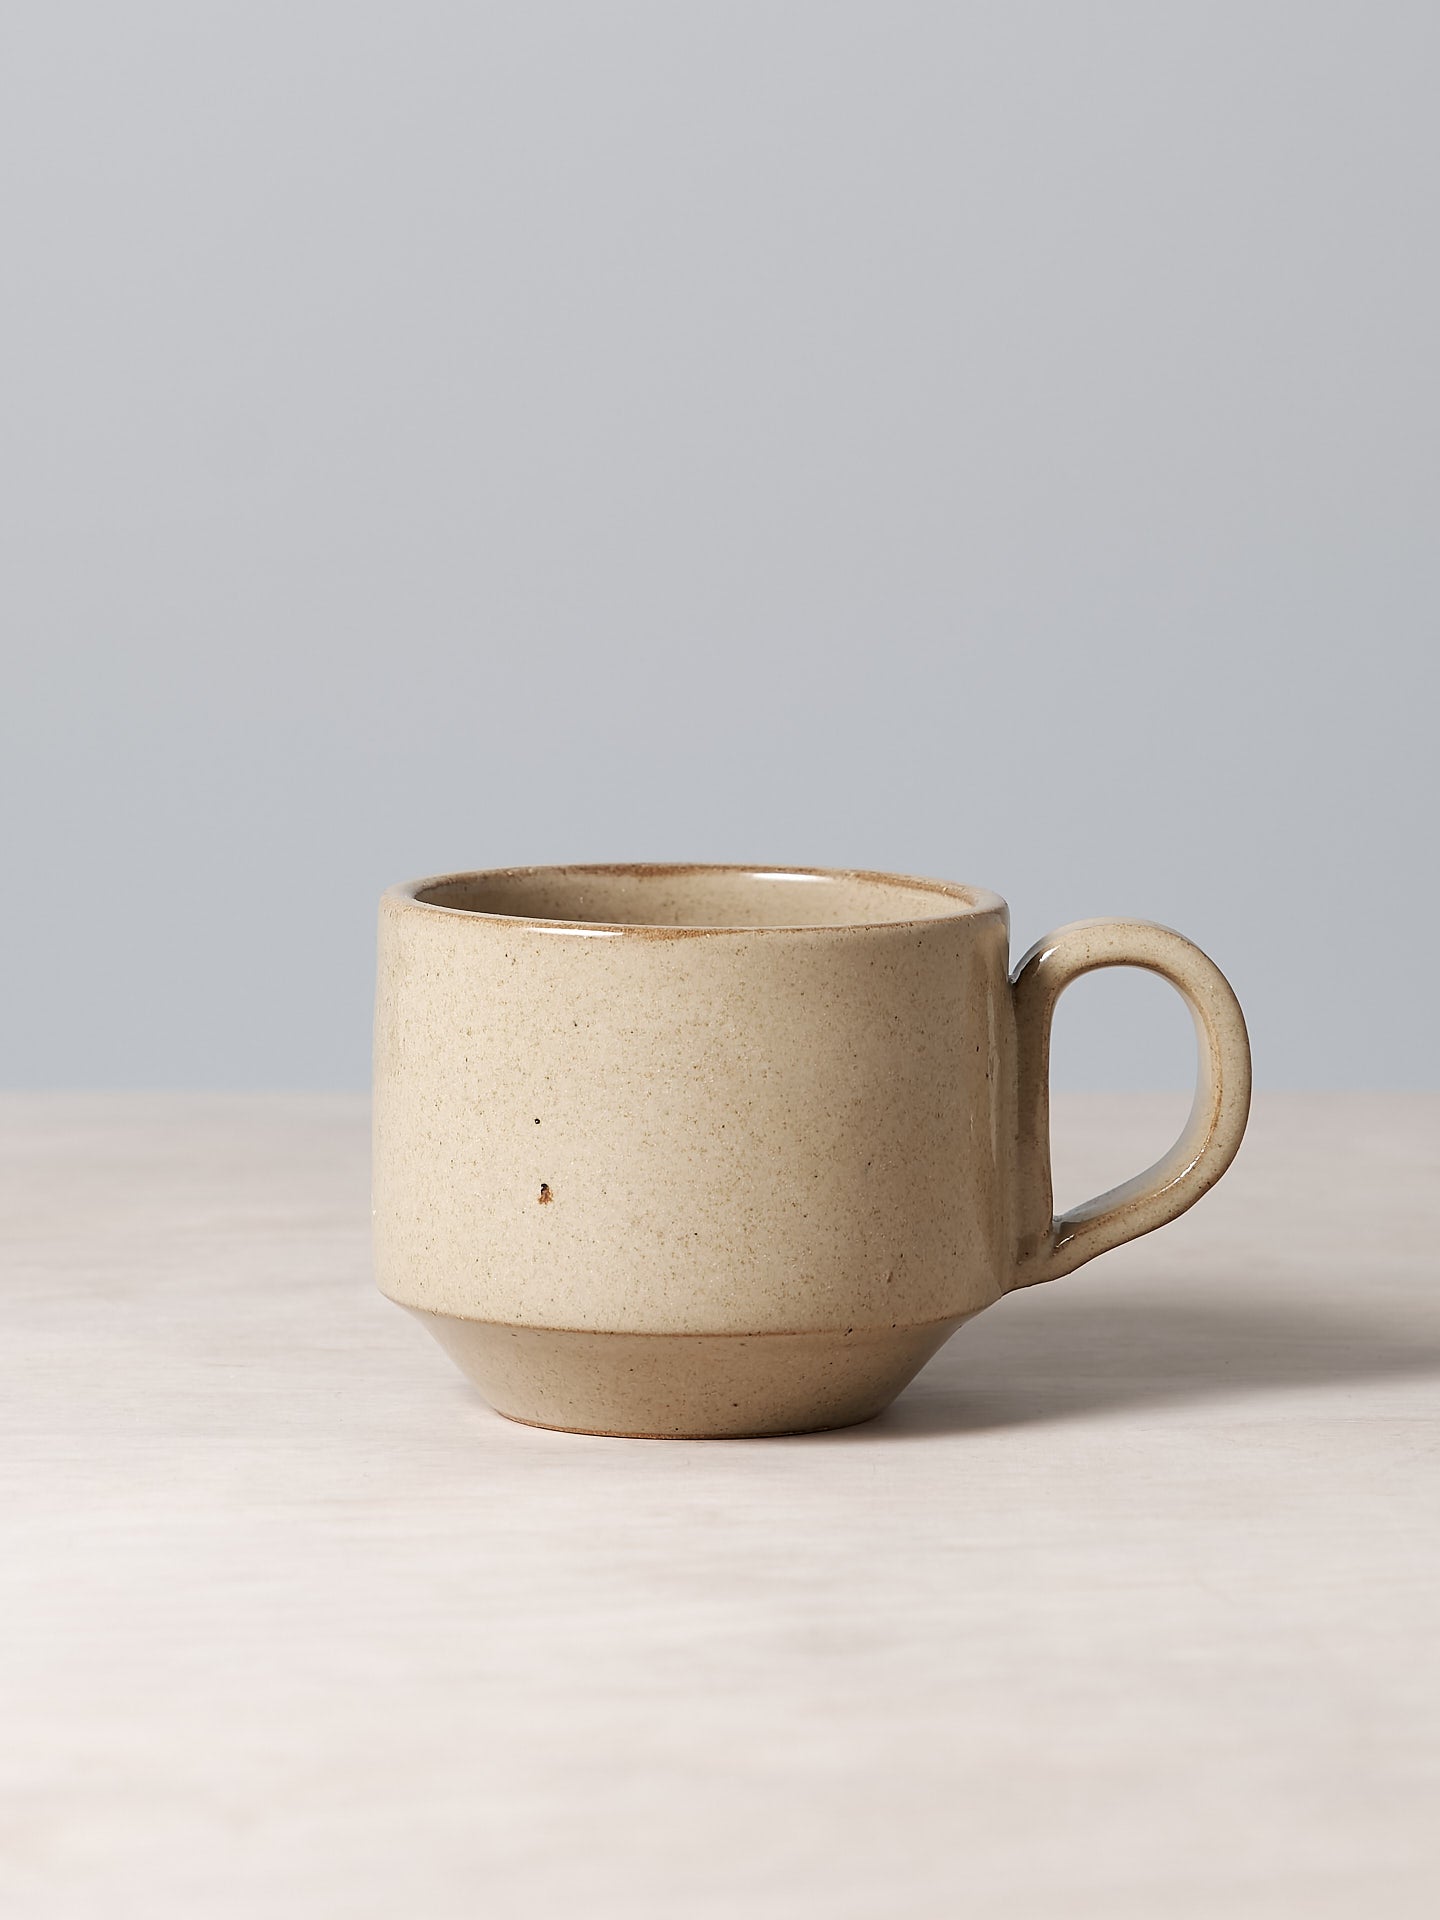 A Medium Stacking Mug – Sand from Richard Beauchamp sitting on a table.